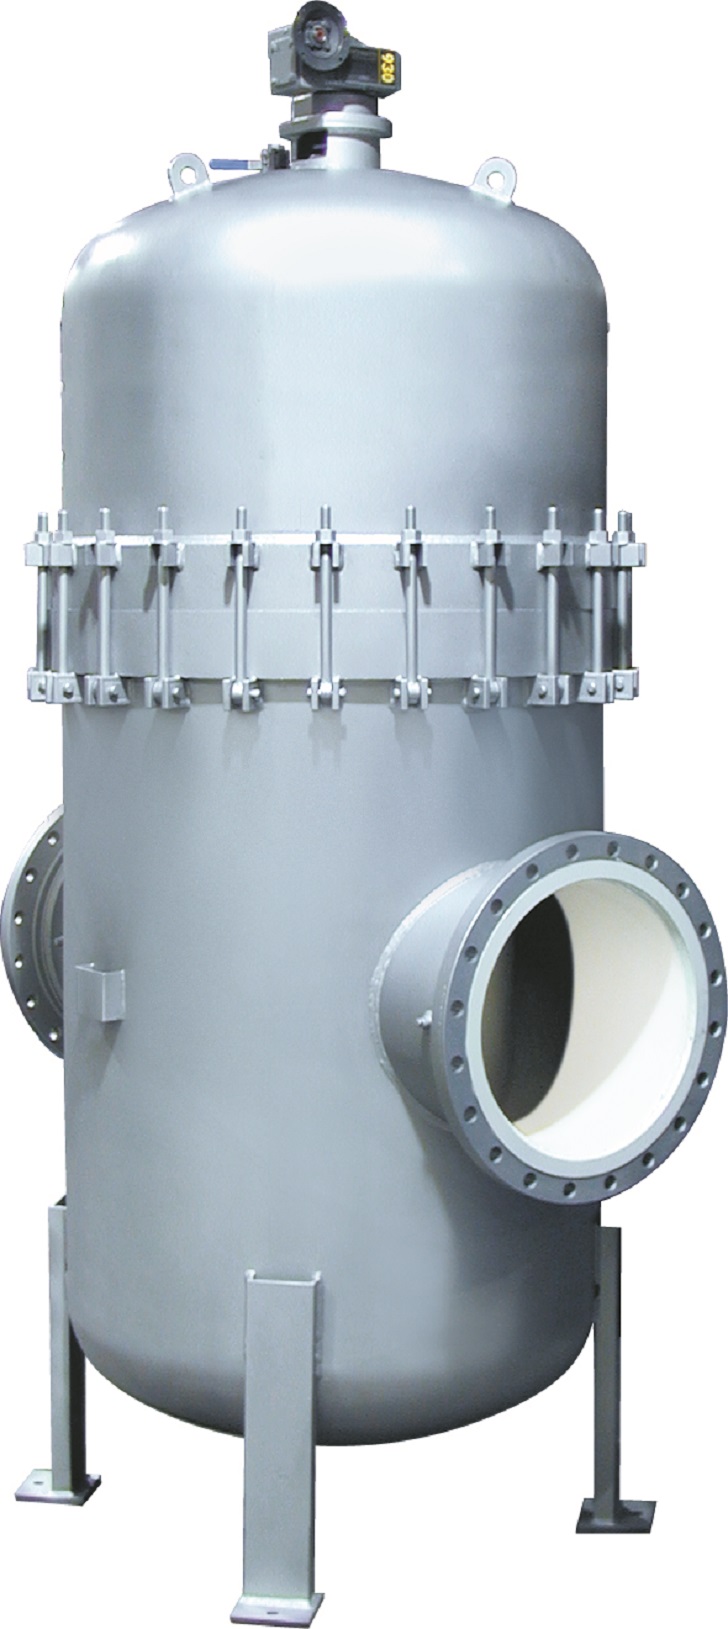 The Eaton Model 2596 automatic self-cleaning strainer is designed for continuous, uninterrupted removal of entrained solids from liquids in pipeline systems.